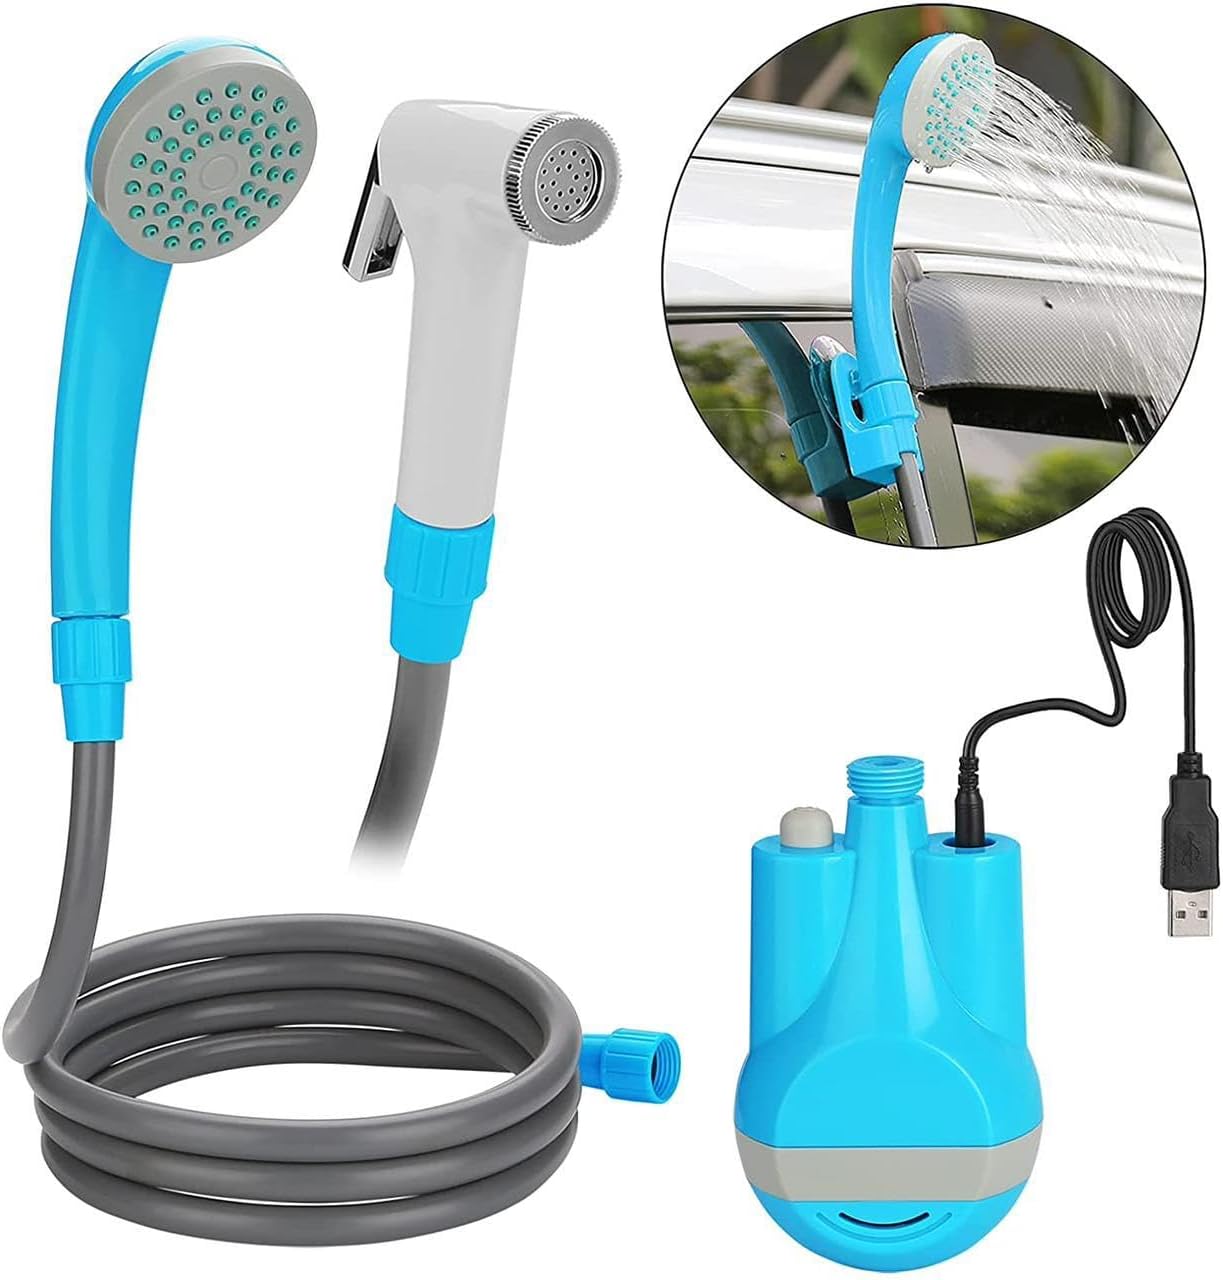 PGT-STORE Portable Camping Shower,Travel Shower Outdoor Portable Shower Head 2200 mAH Rechargeable Battery USB Cable